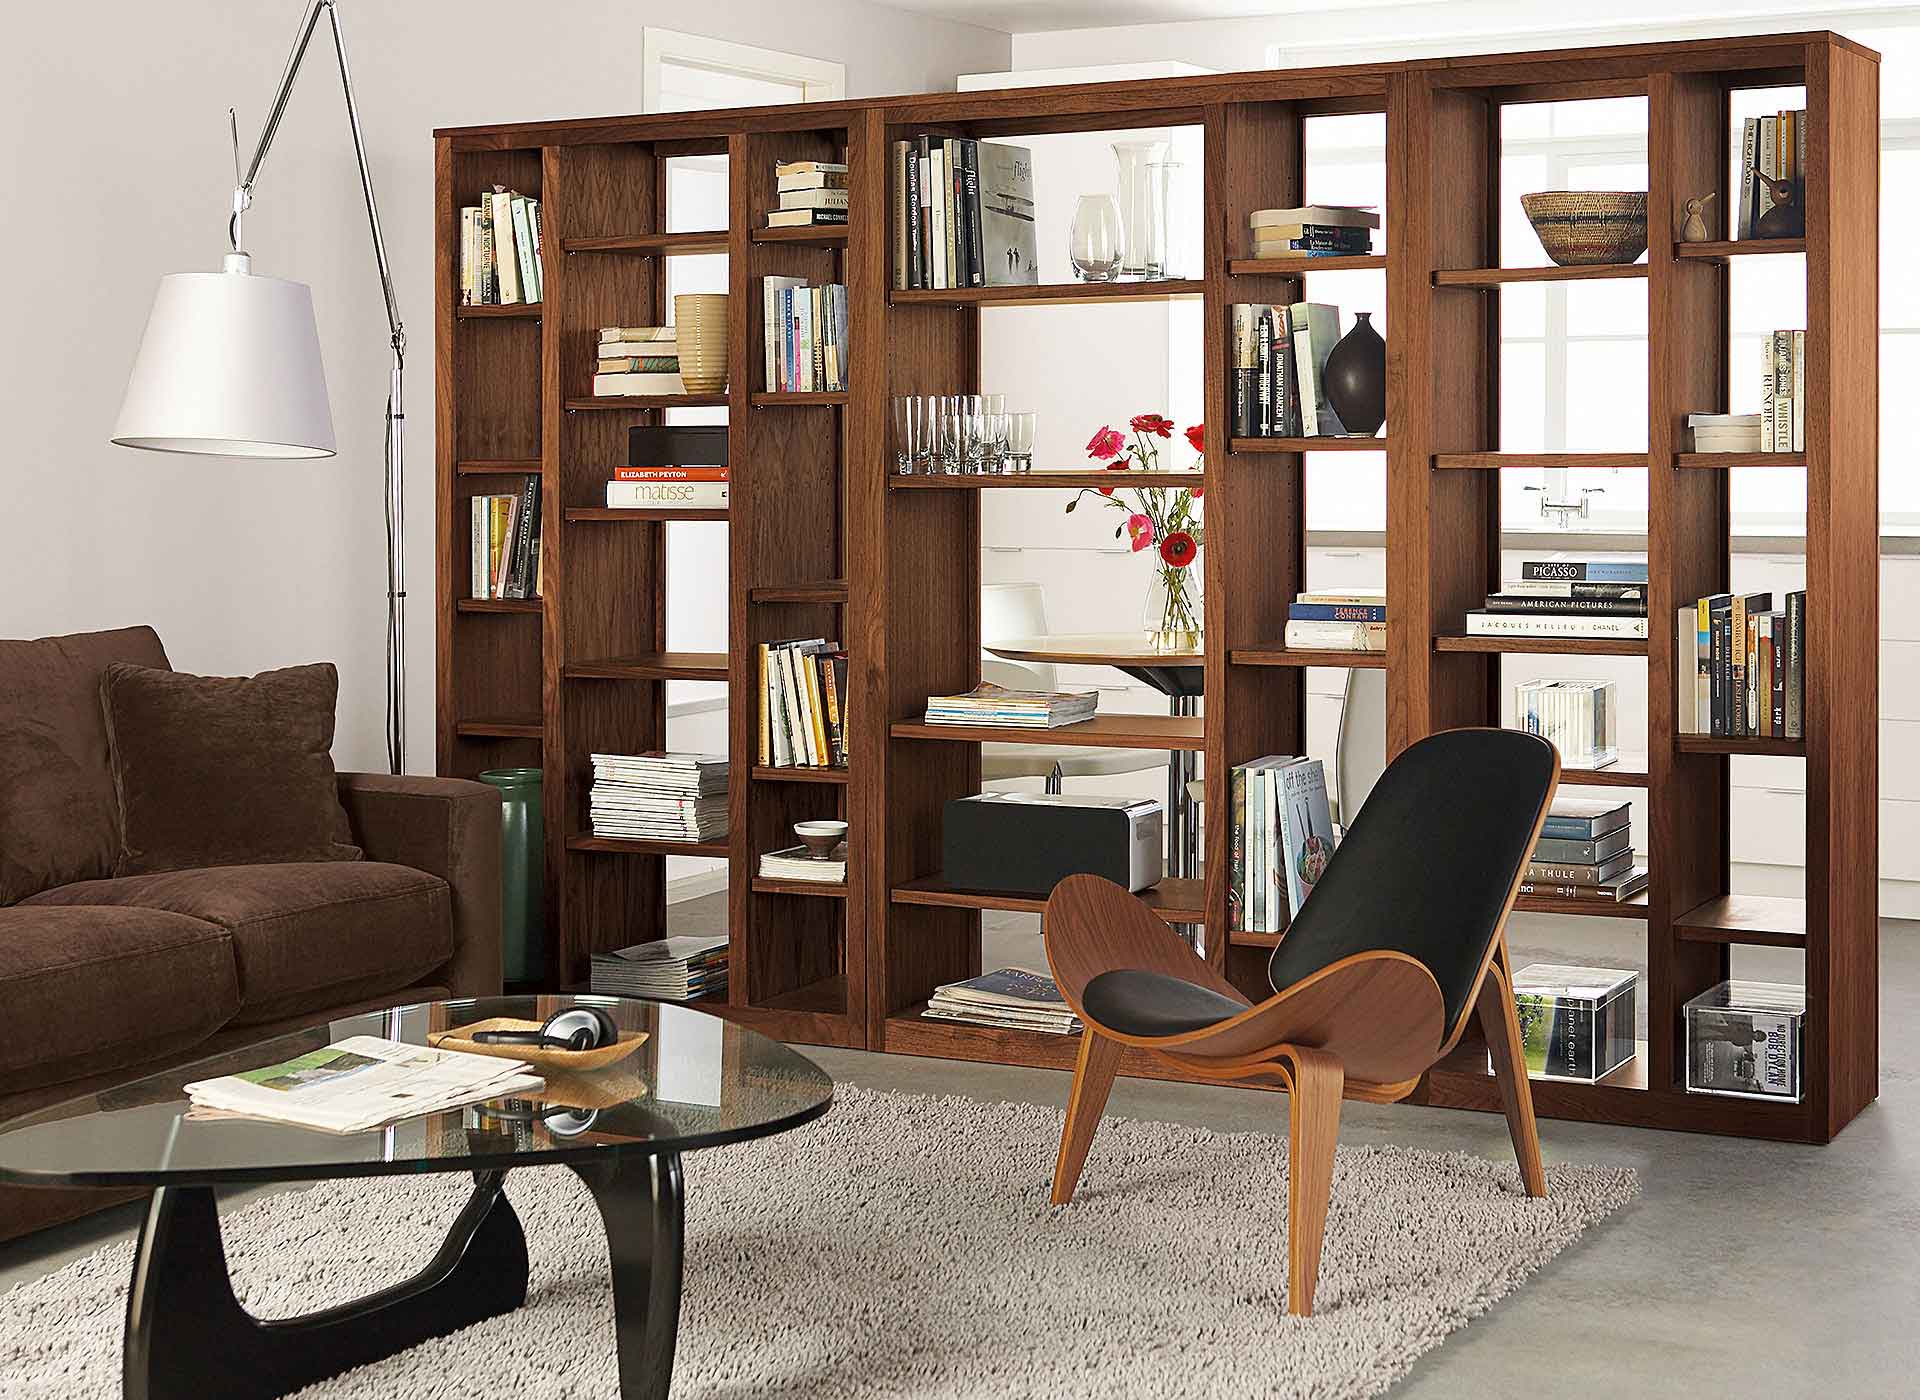 Divide Small Spaces With Bookshelves For Separation